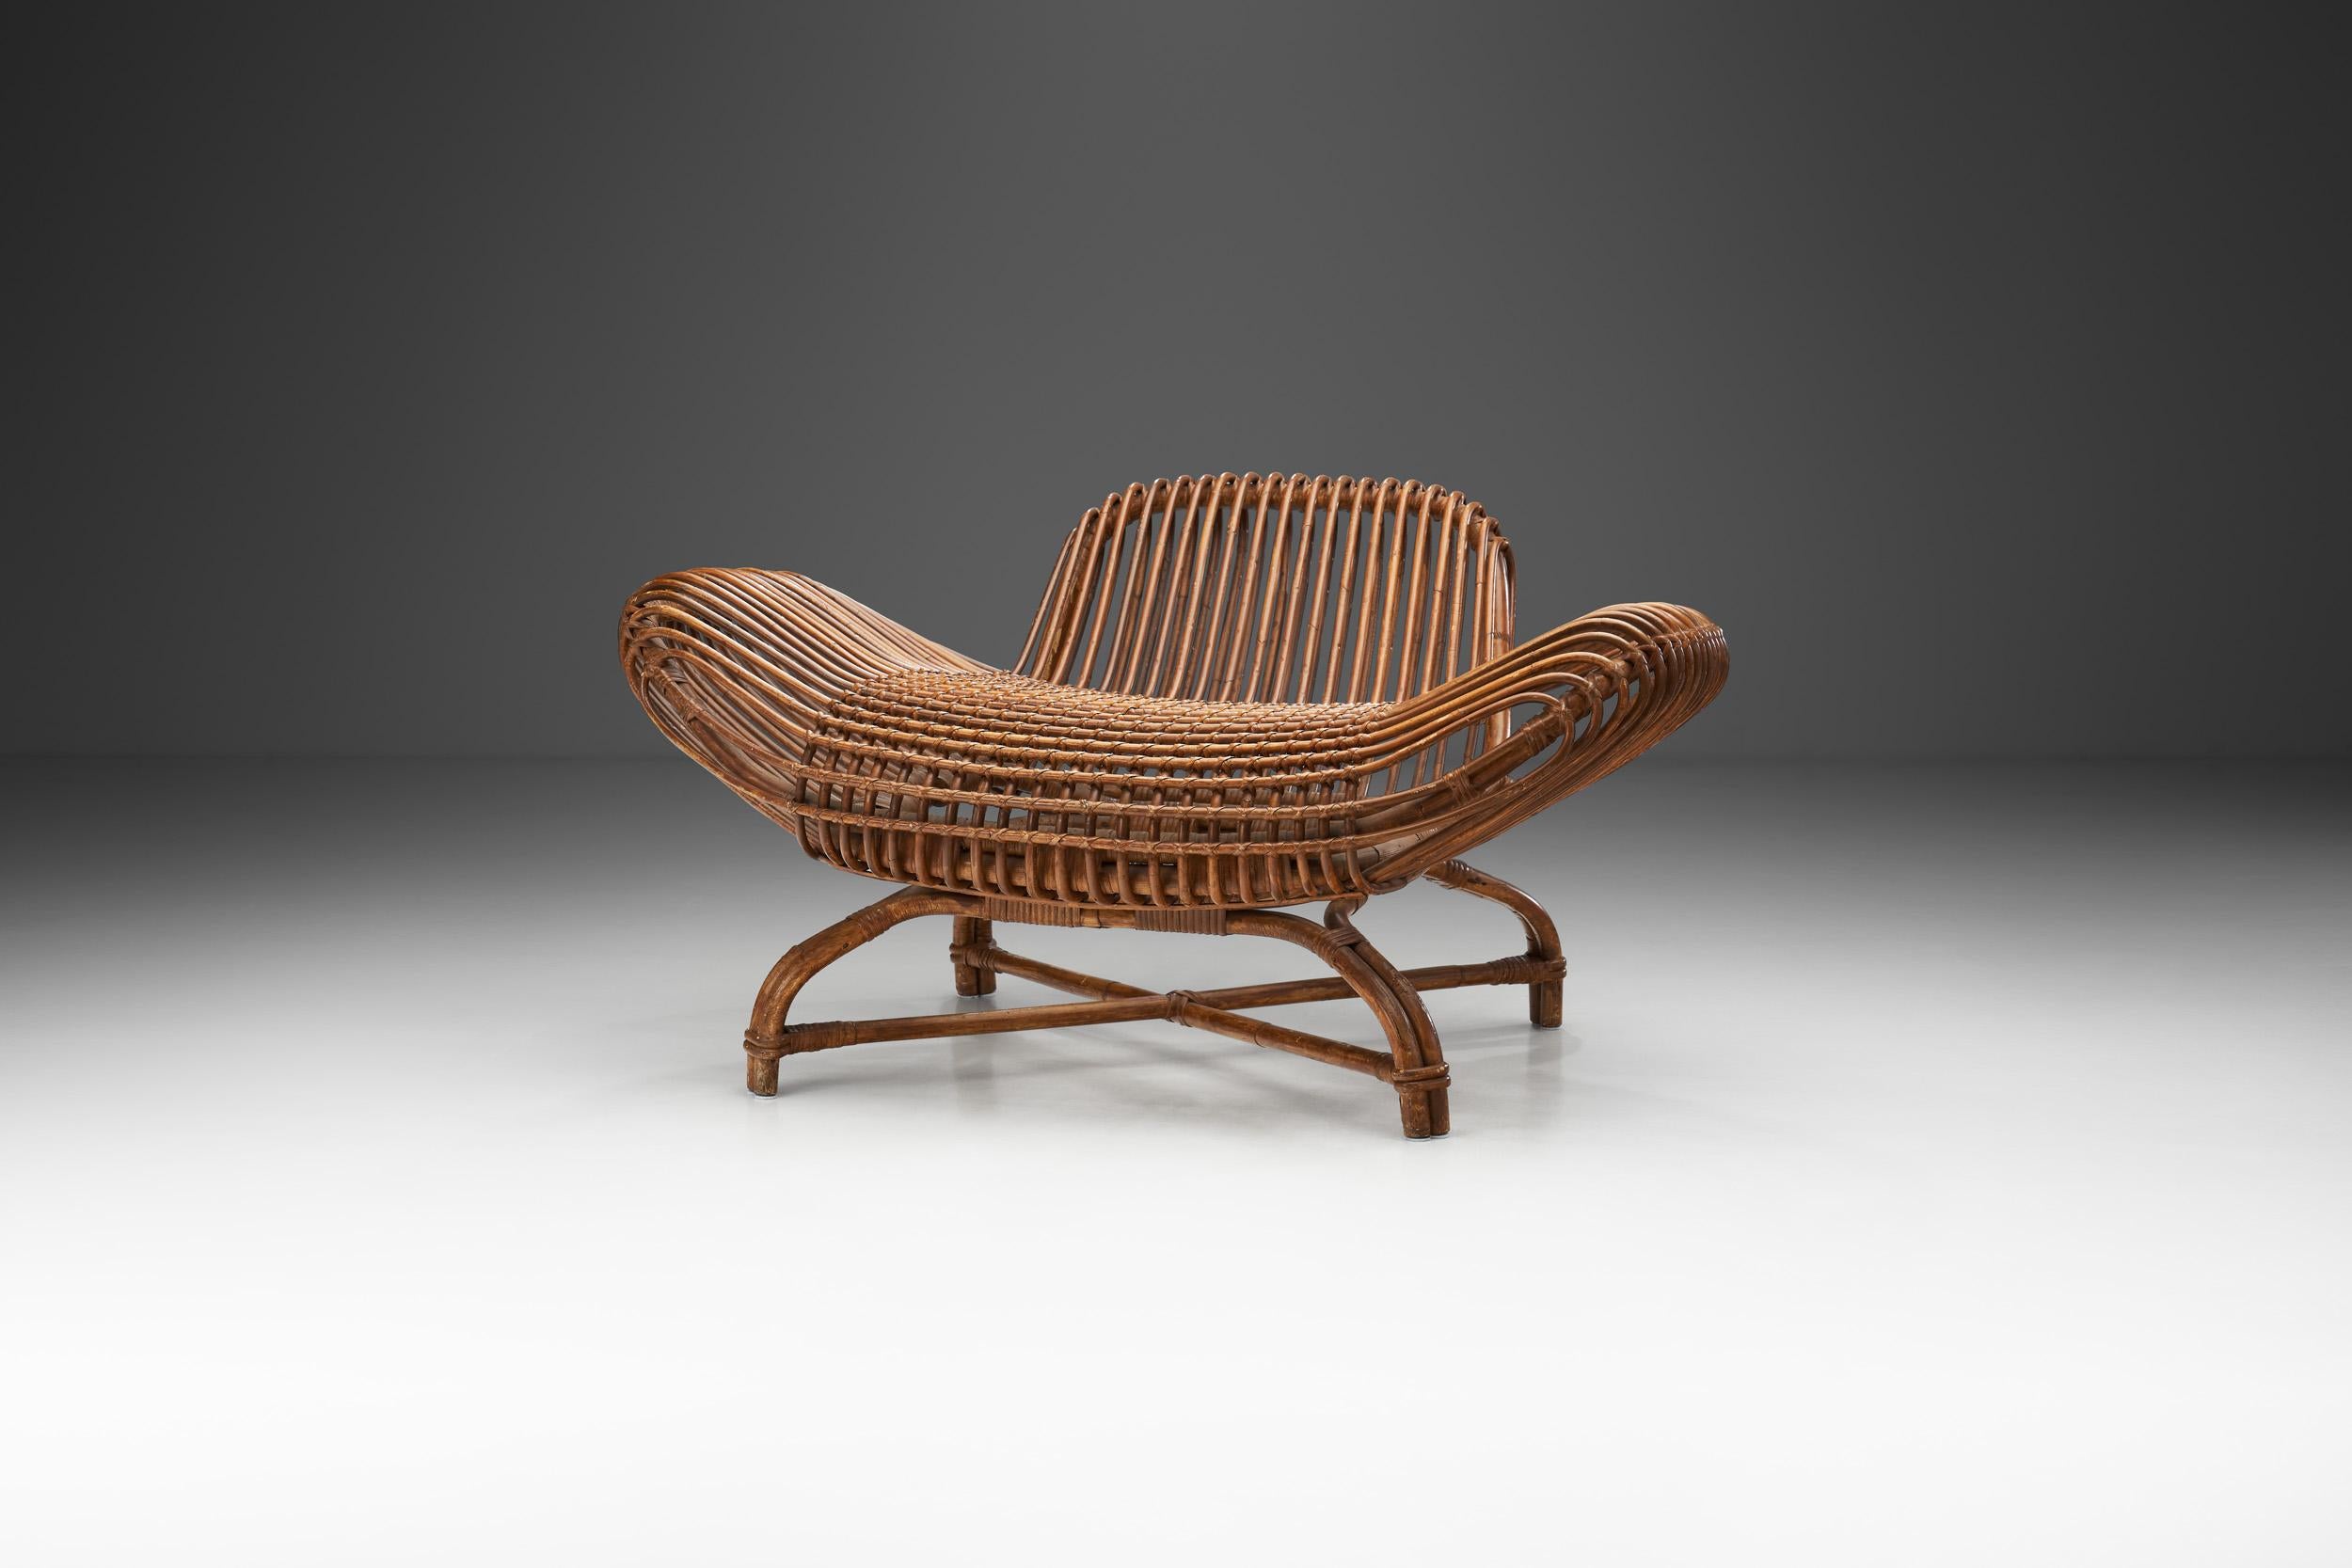 This very rare chair model was created around 1961 by Asanao Uematsu. The level of artistry of this chair might explain is rarity, as it is a design that was impossible to mass produce or even reproduce.

The quality of the handwoven wicker and